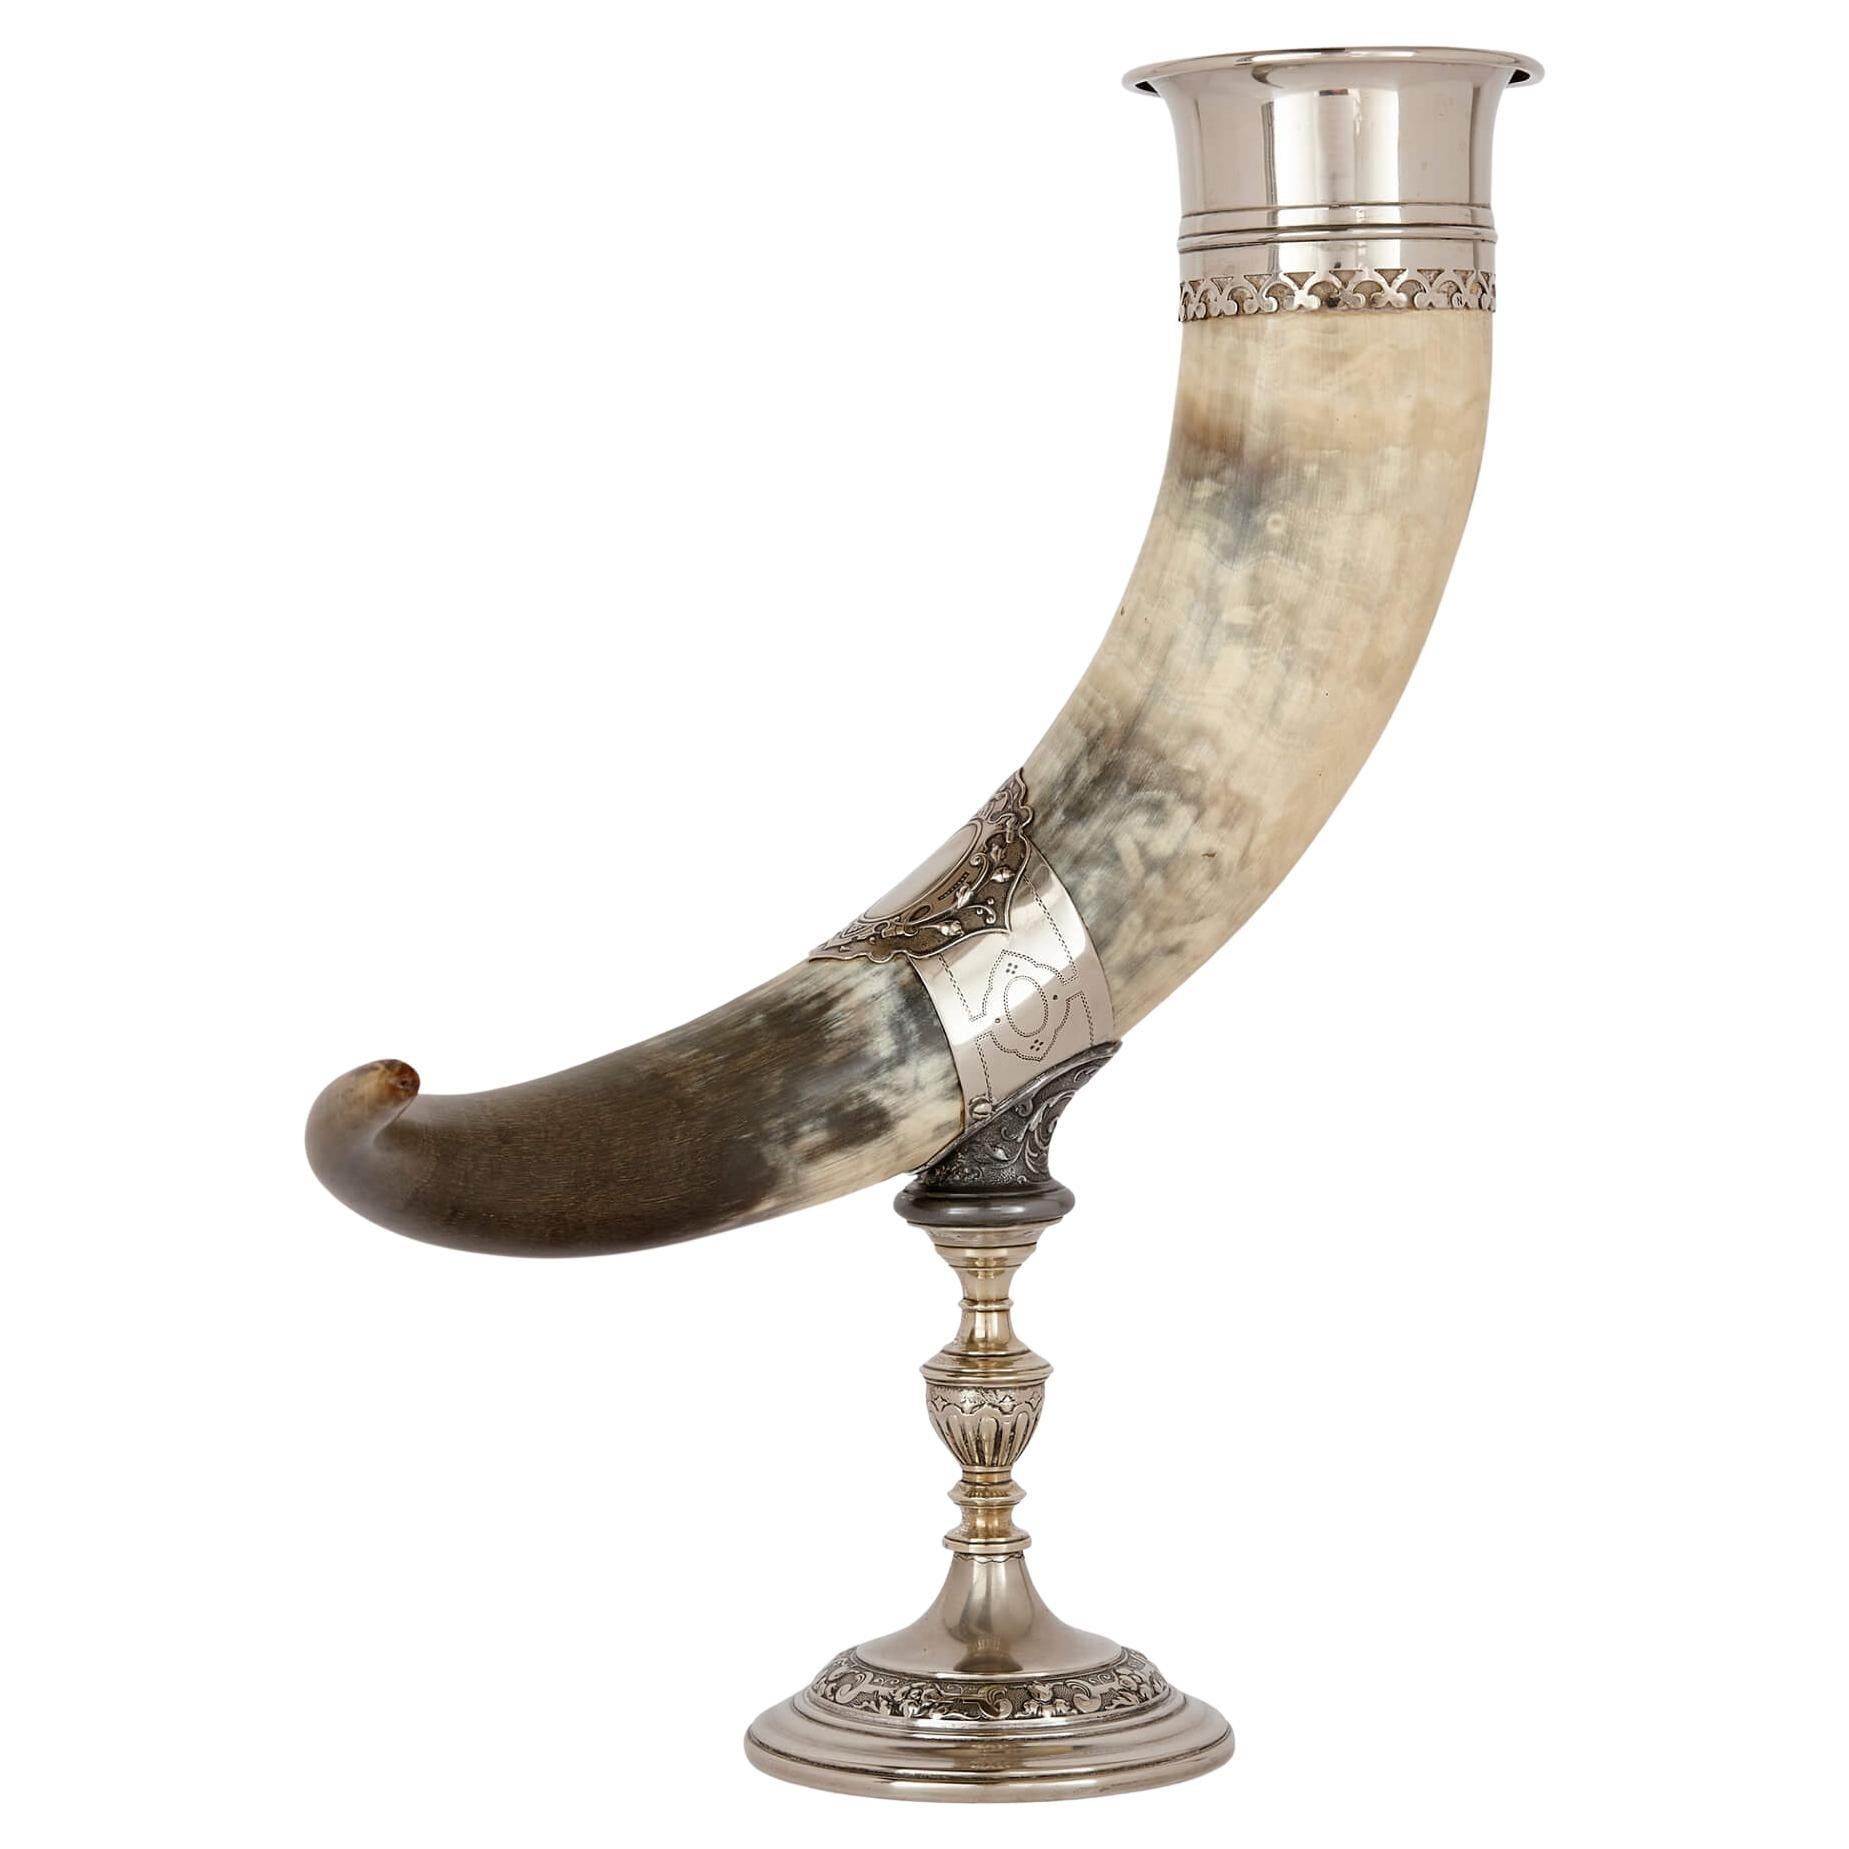 Silver plated horn cornucopia vase by WMF, German Early 20th Century